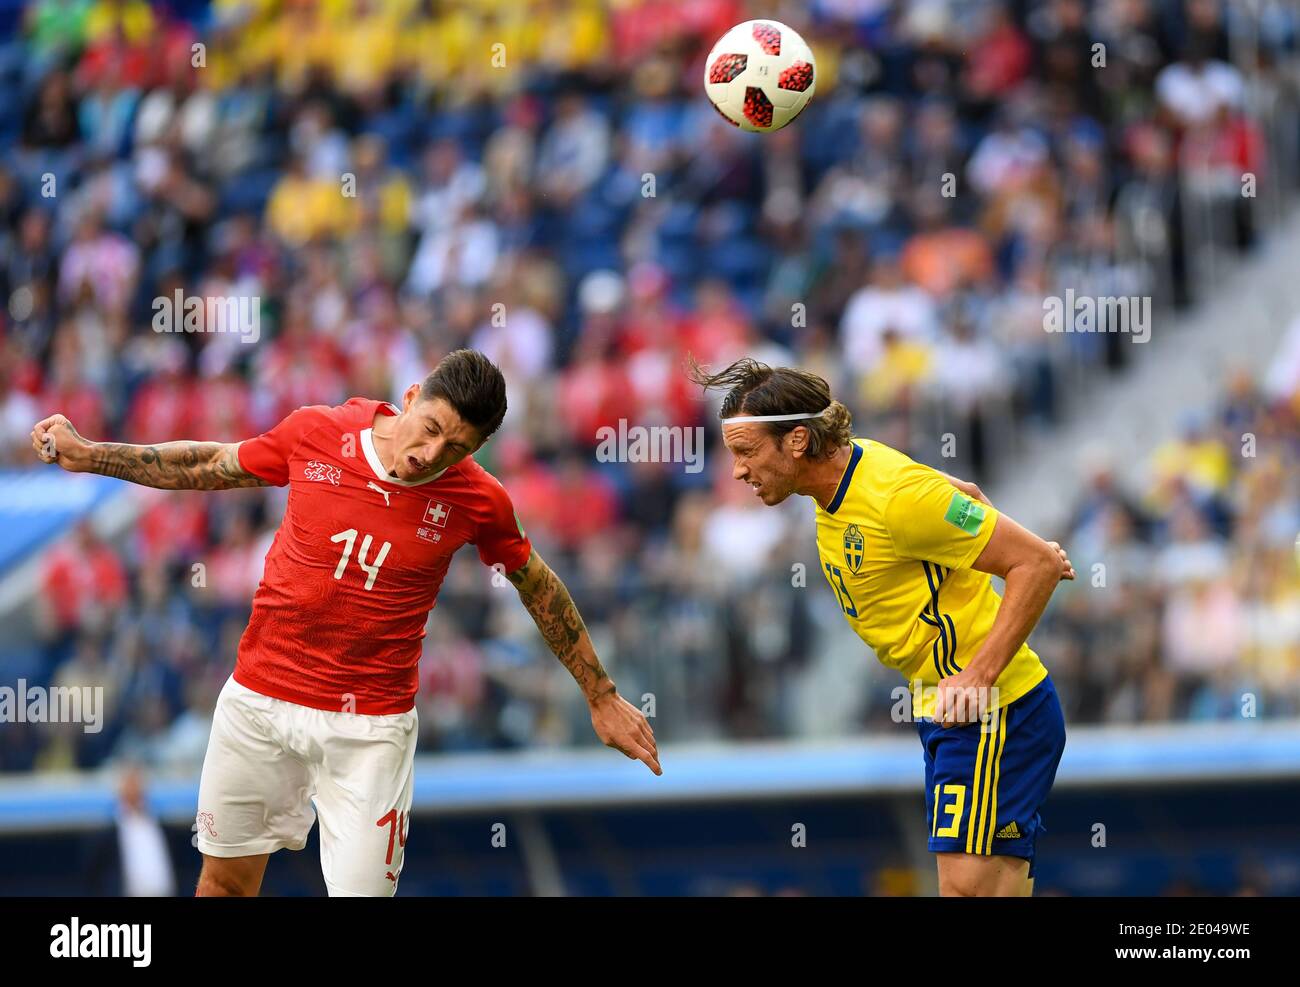 SAINT PETERSBURG, RUSSIA- 3 July 2018: Steven Zuber (L) of Switzerland vs Gustav Svensson of Sweden during the 2018 FIFA World Cup Russia Round of 16 Stock Photo